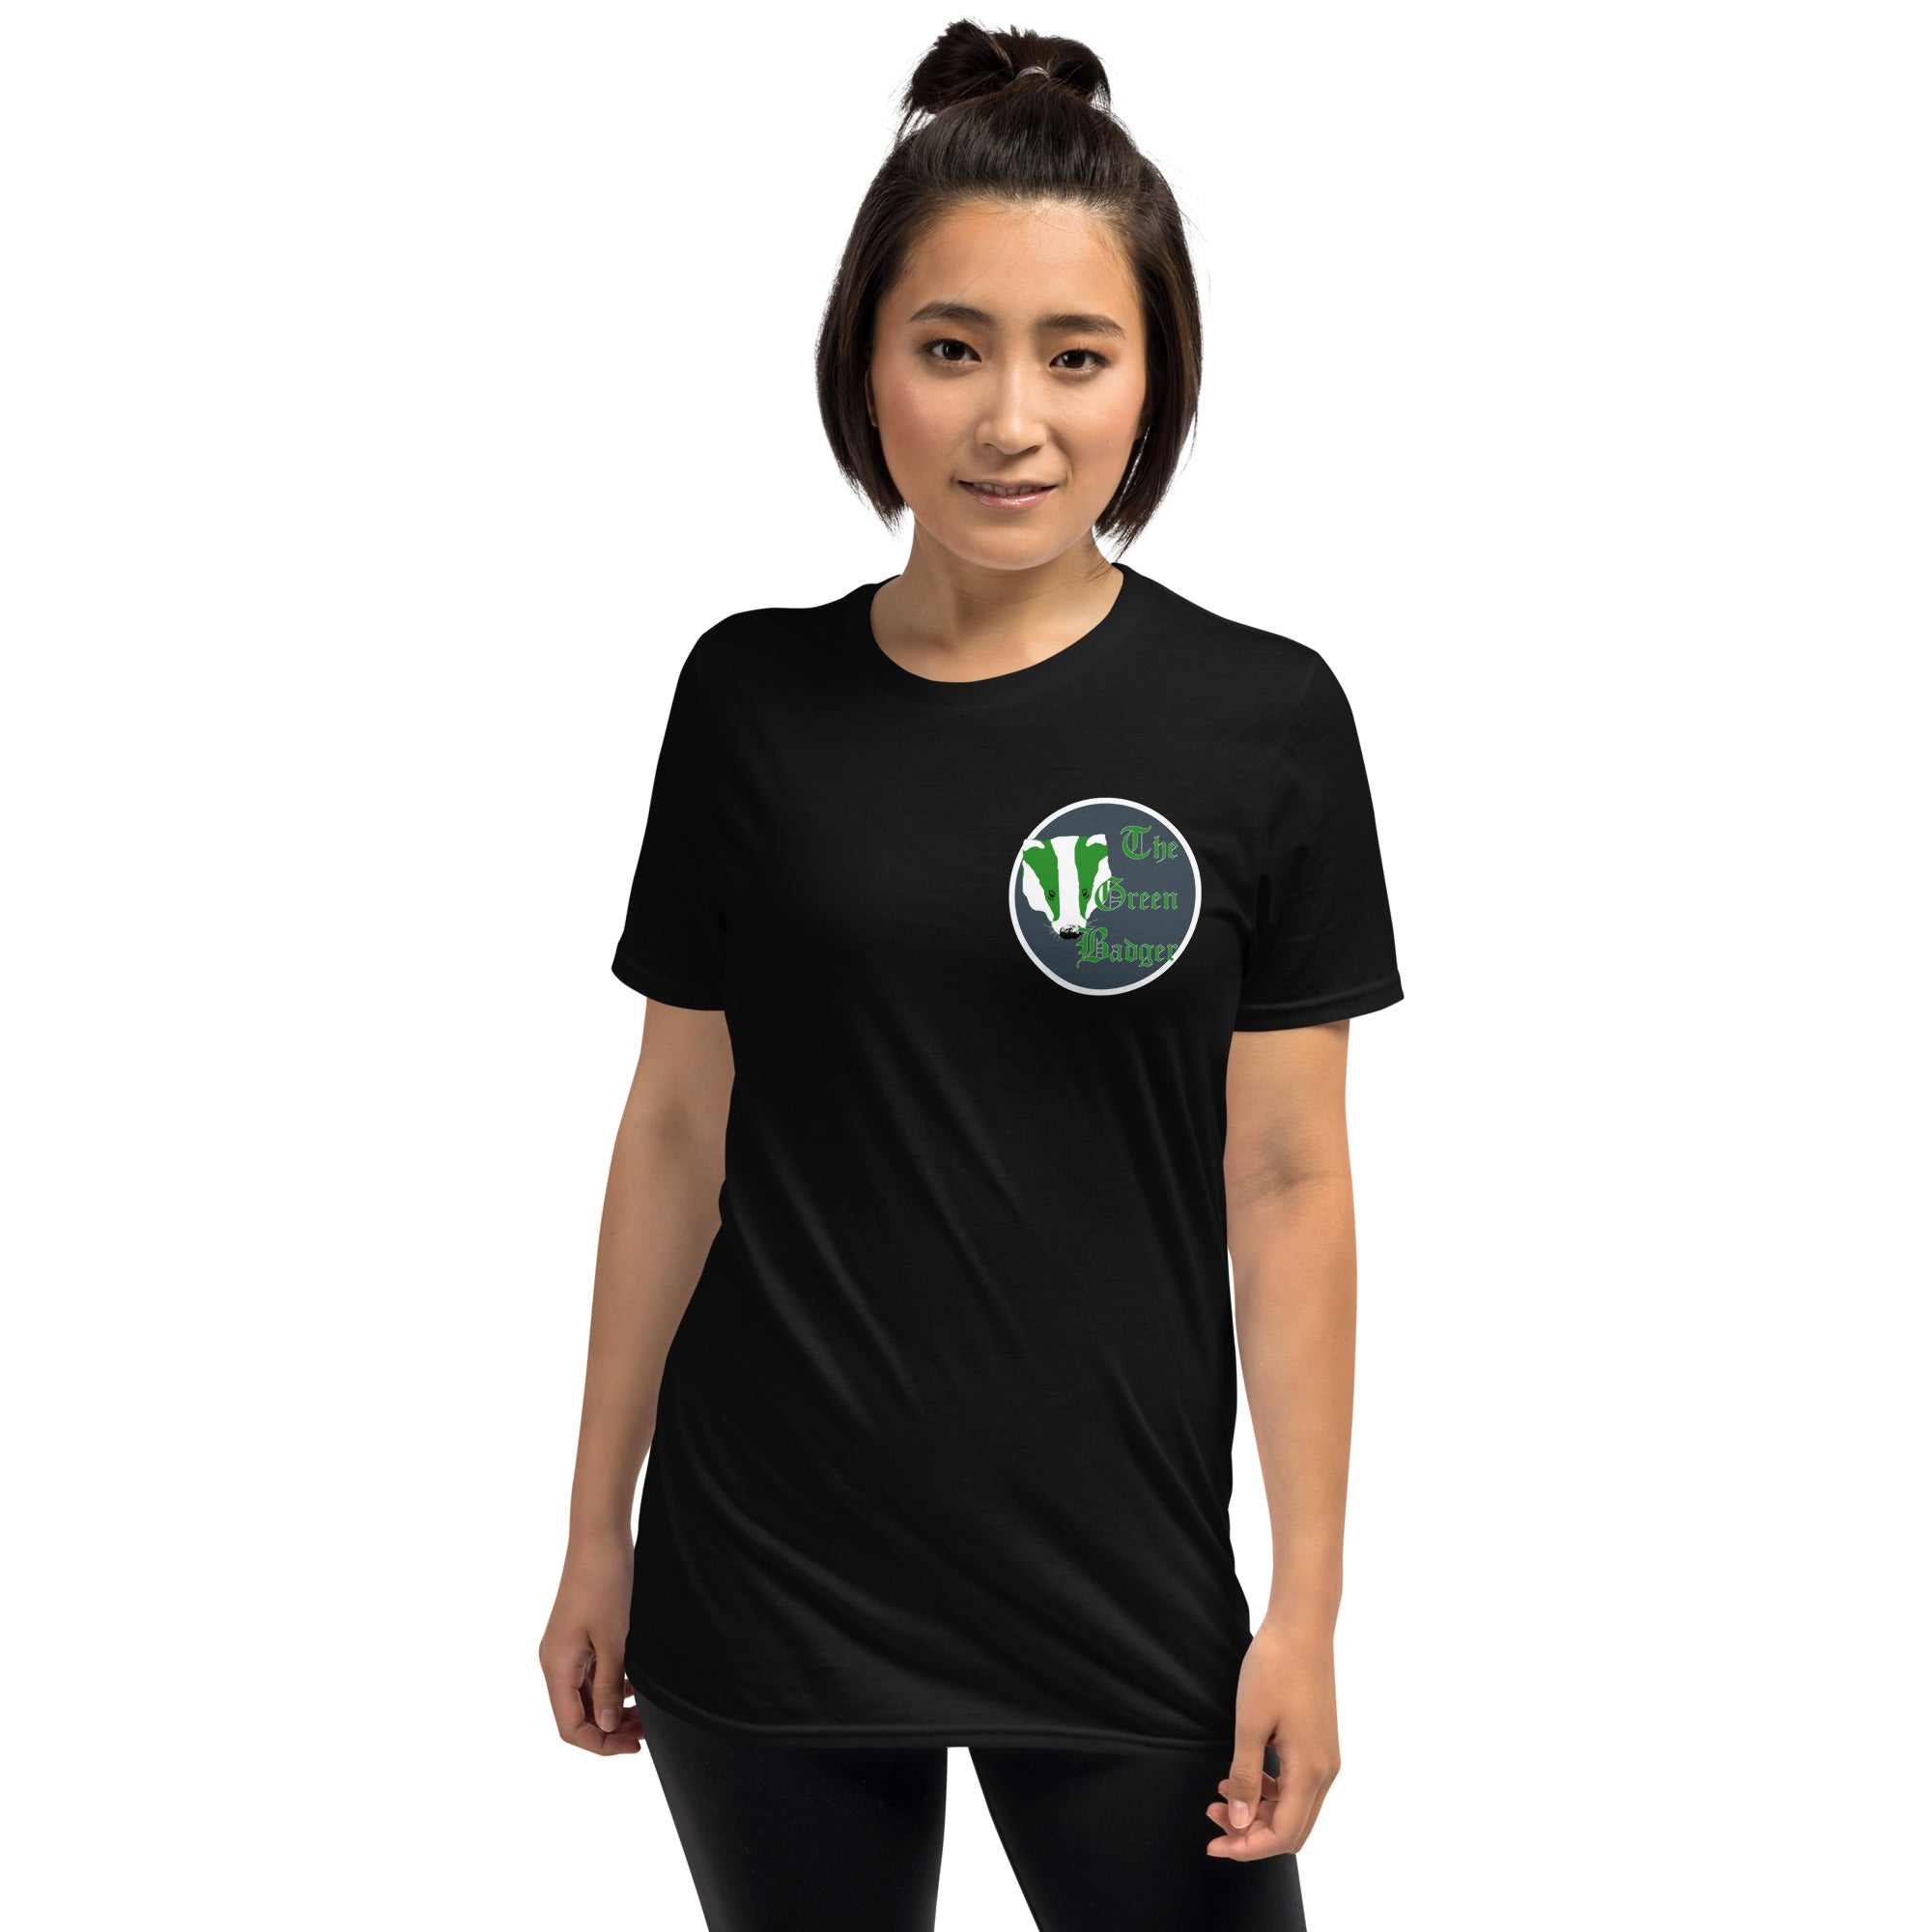 The Green front and Unisex T-Shirt